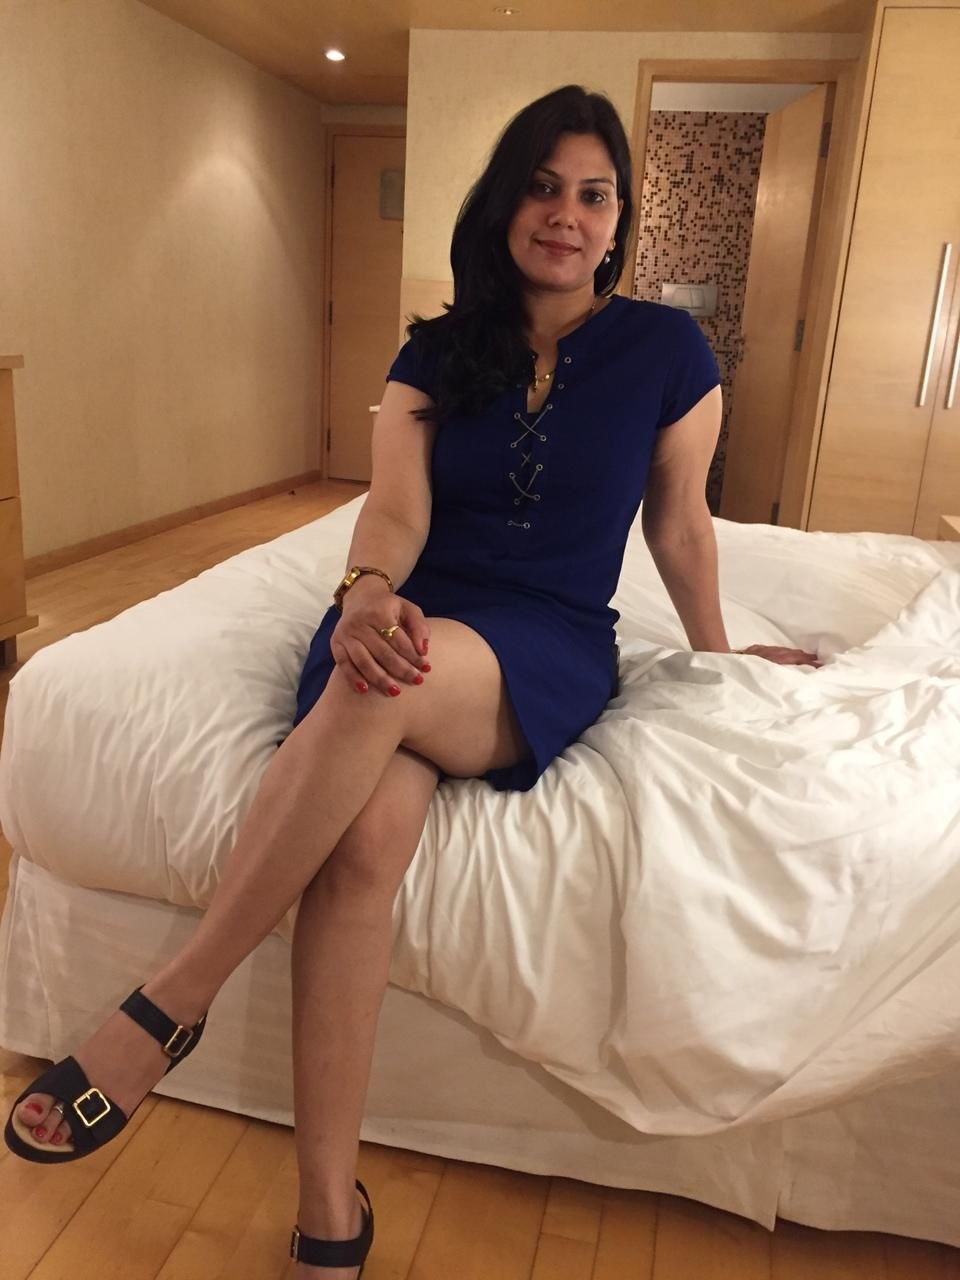 VADODARA CALL ME NOW FULL SAFE&SECURE SERVICE HOT GIRL ANYTIME 